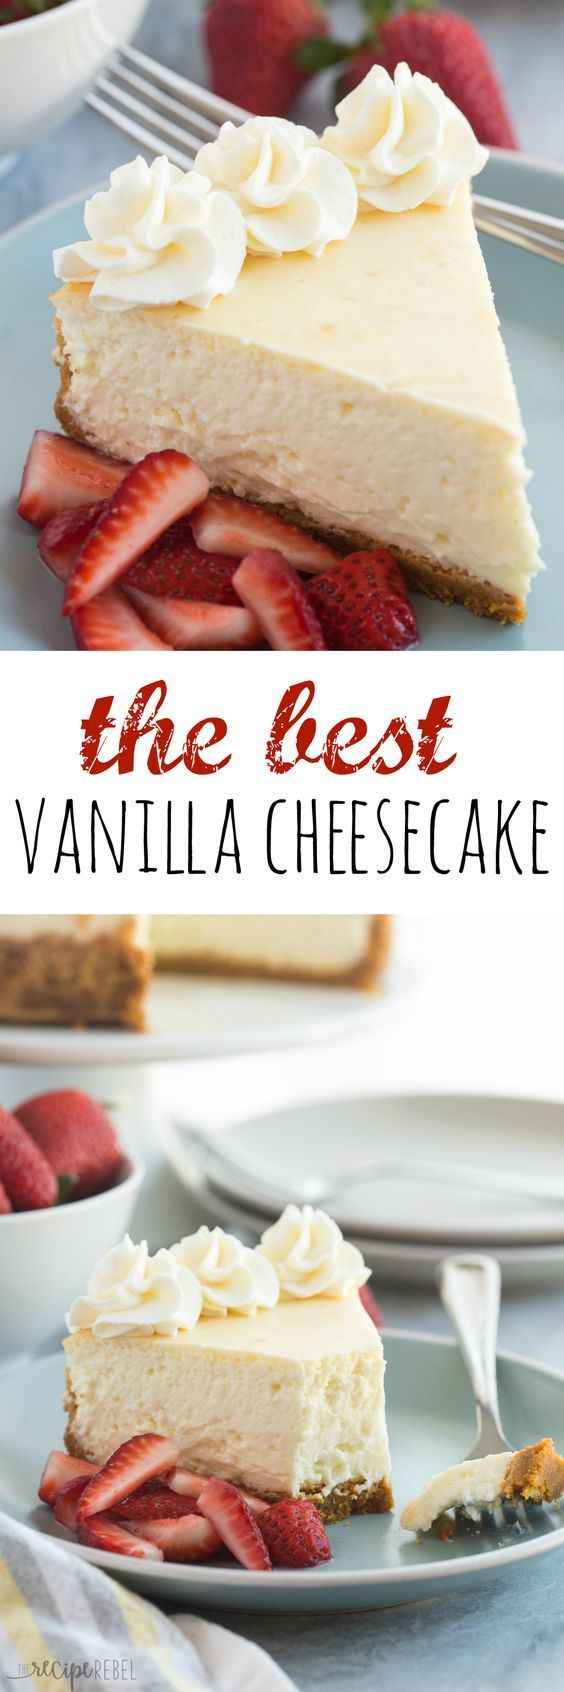 This Vanilla Cheesecake is super creamy and not as heavy as traditional baked cheesecake thanks to a good